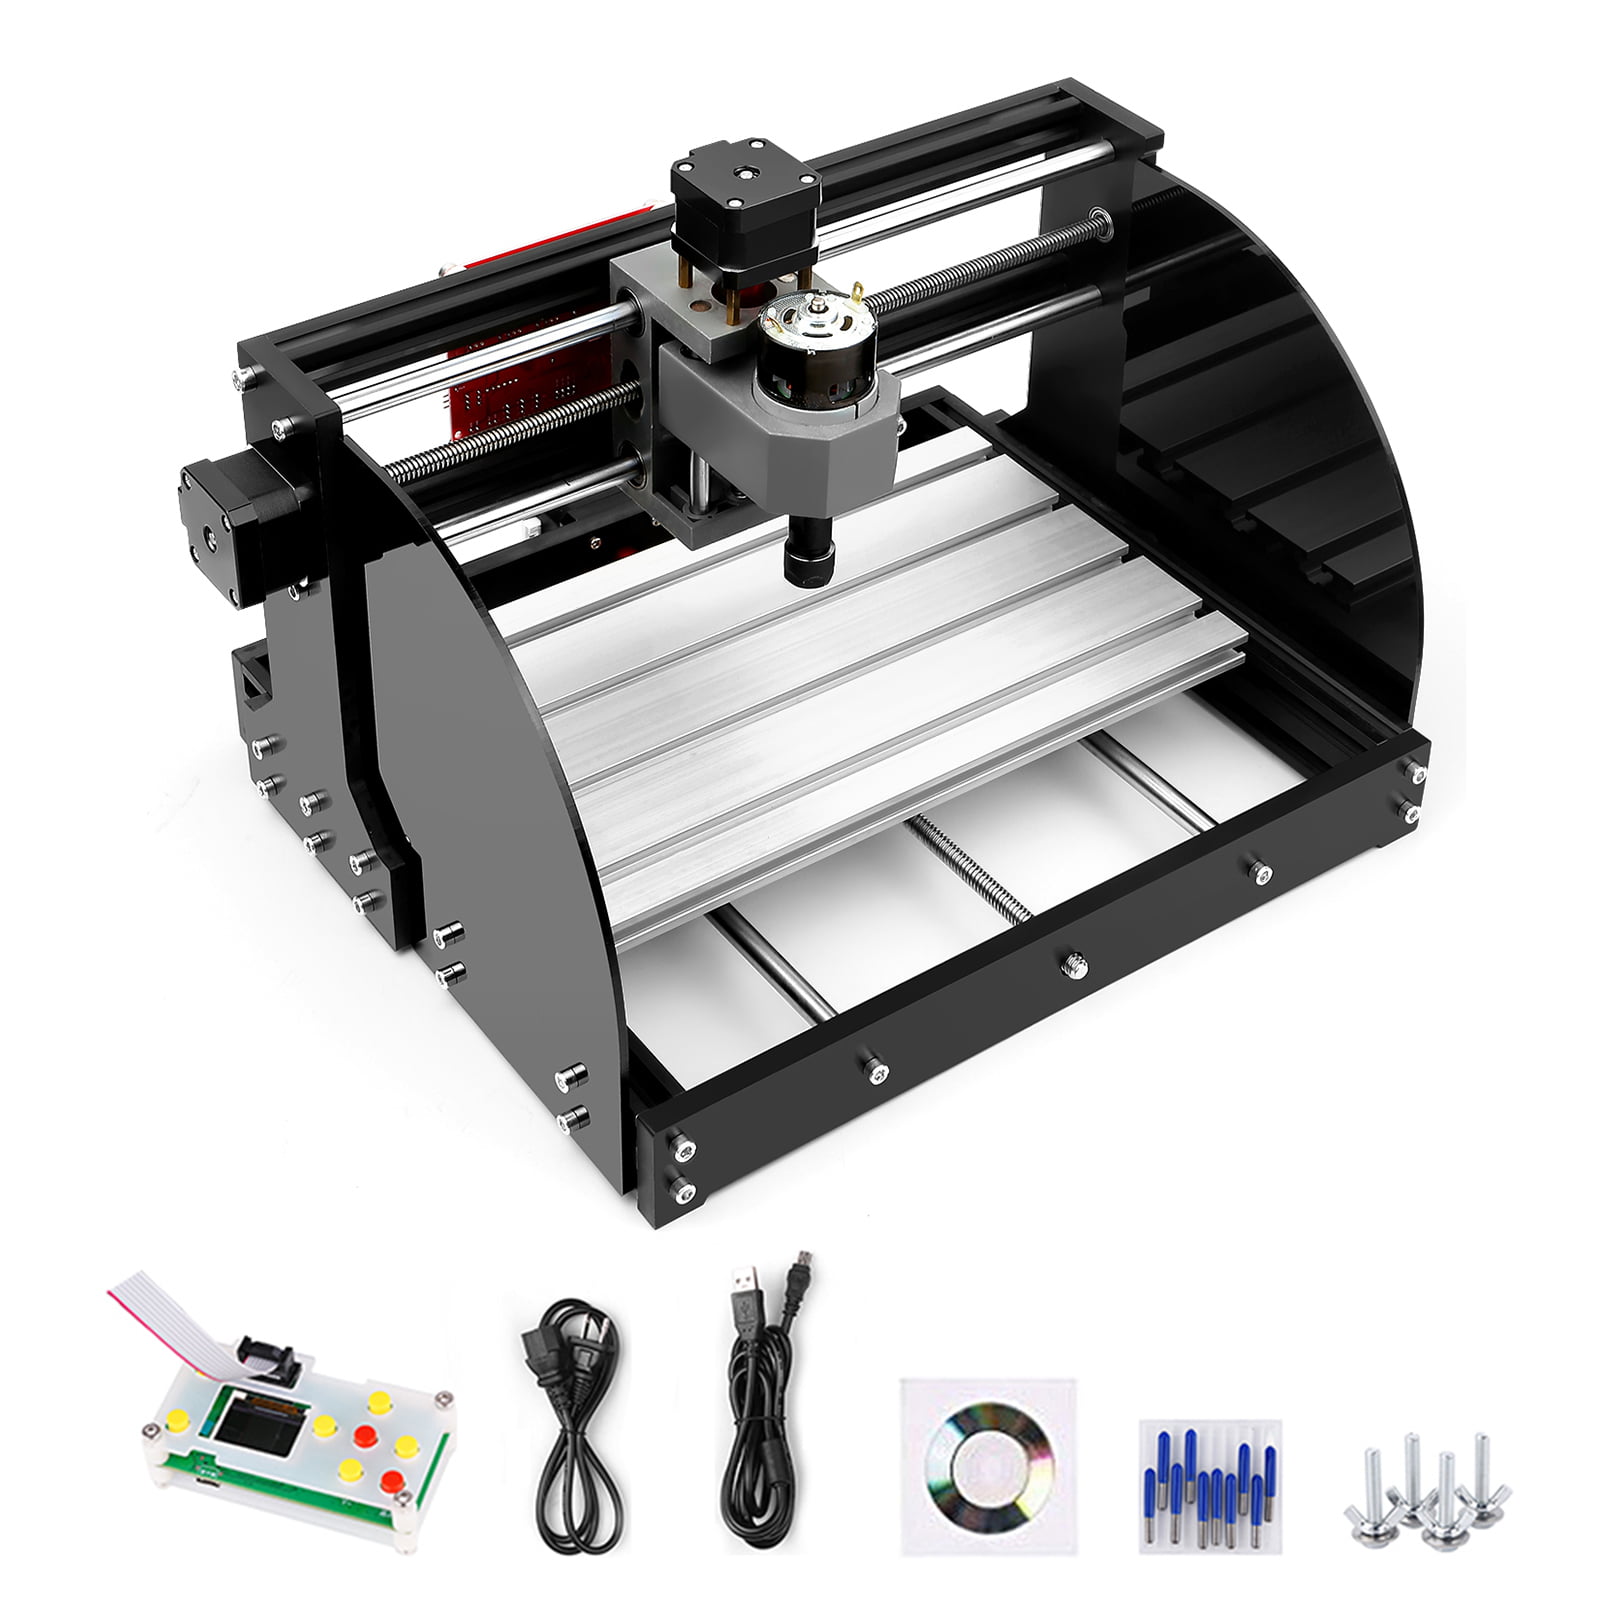 3 Axis PCB Milling Machine Wood Router Engraver with Offline Controller with ER11 and 5mm Extension Rod CNC 3018 Pro GRBL Control DIY Mini CNC Machine